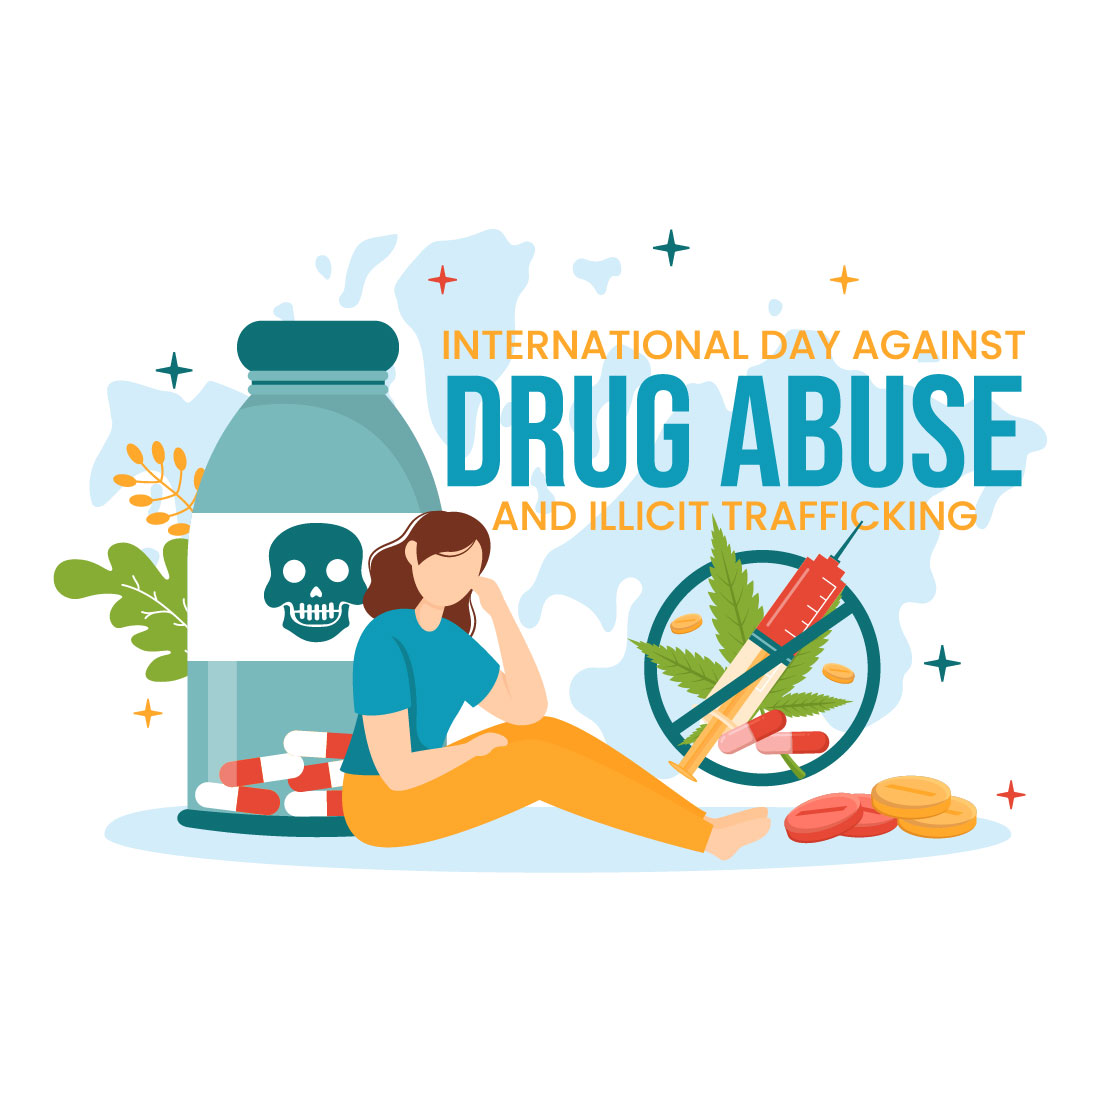 13 Against Drug Abuse and Illicit Trafficking illustration preview image.